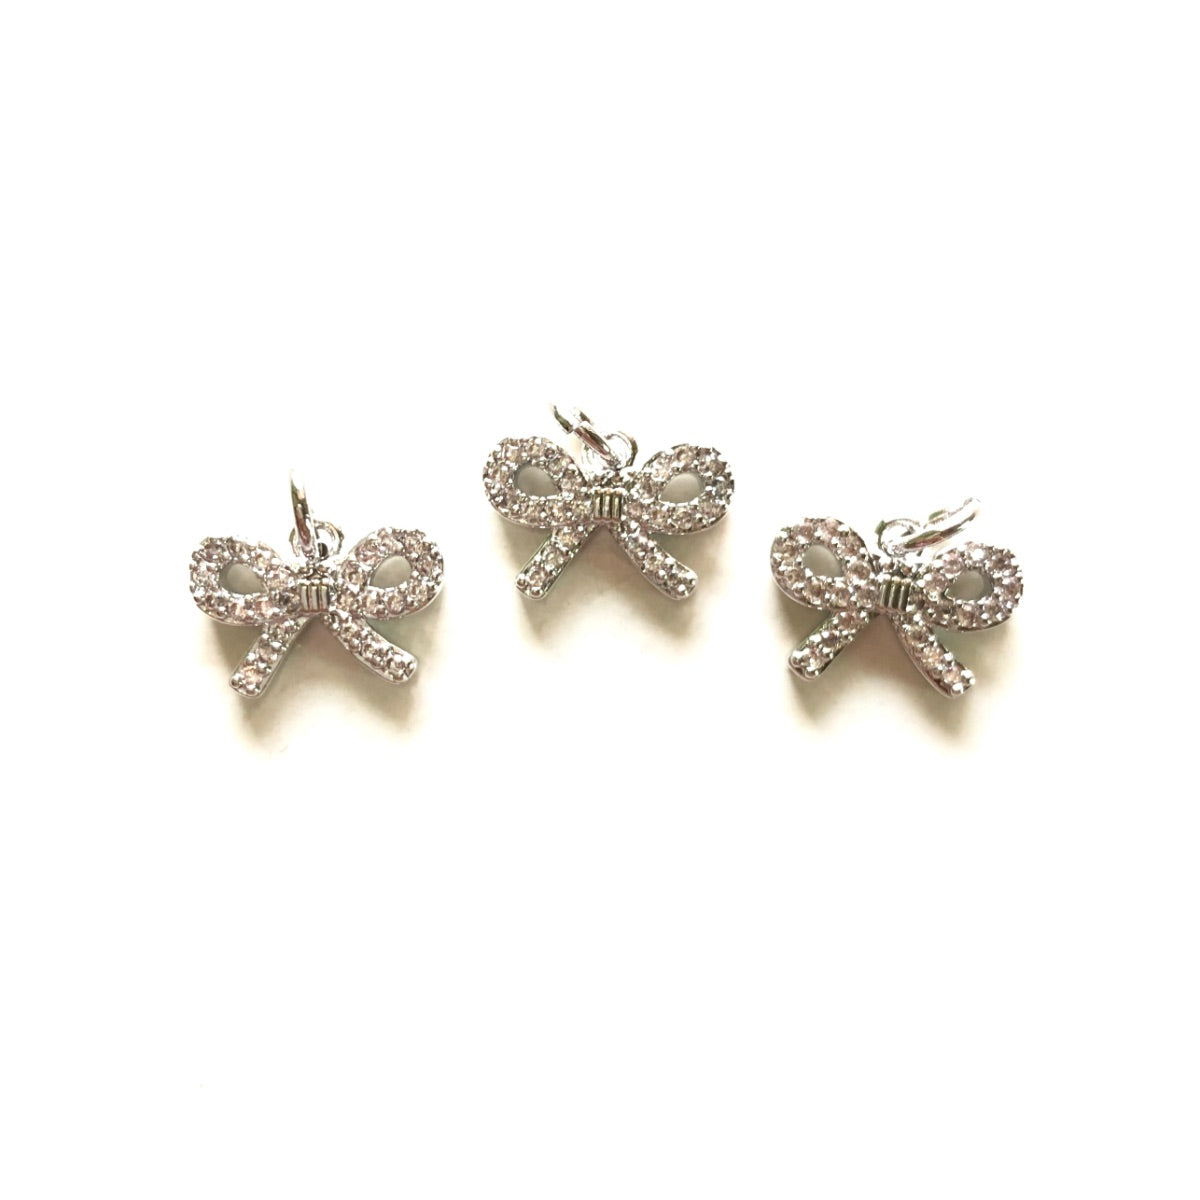 10pcs/lot 12.3*9mm Small Size CZ Pave Bow Tie Charms Silver CZ Paved Charms Bow Ties Small Sizes Charms Beads Beyond